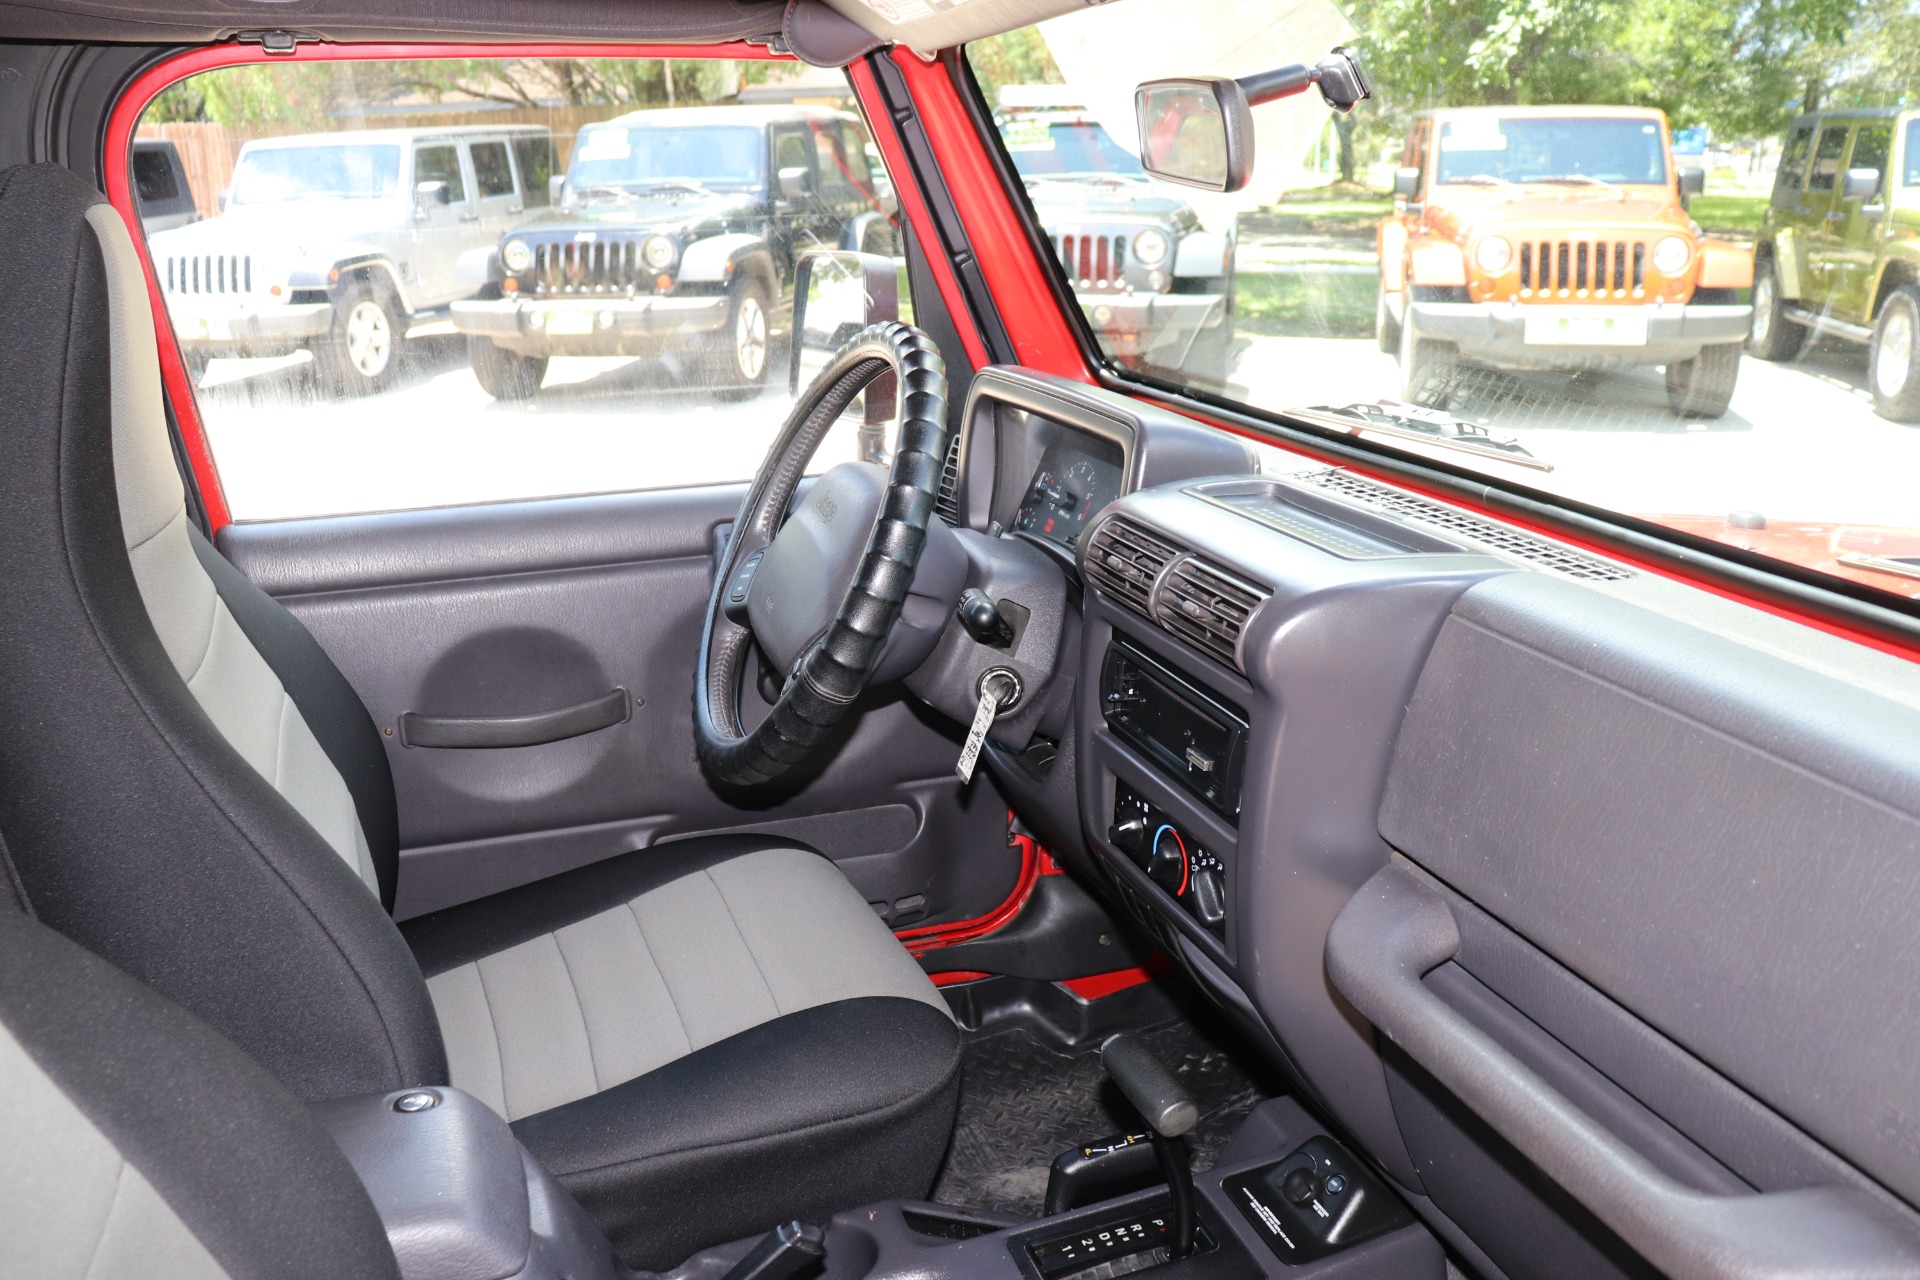 Used 2000 Jeep Wrangler Sport For Sale ($18,995) | Select Jeeps Inc. Stock  #729480